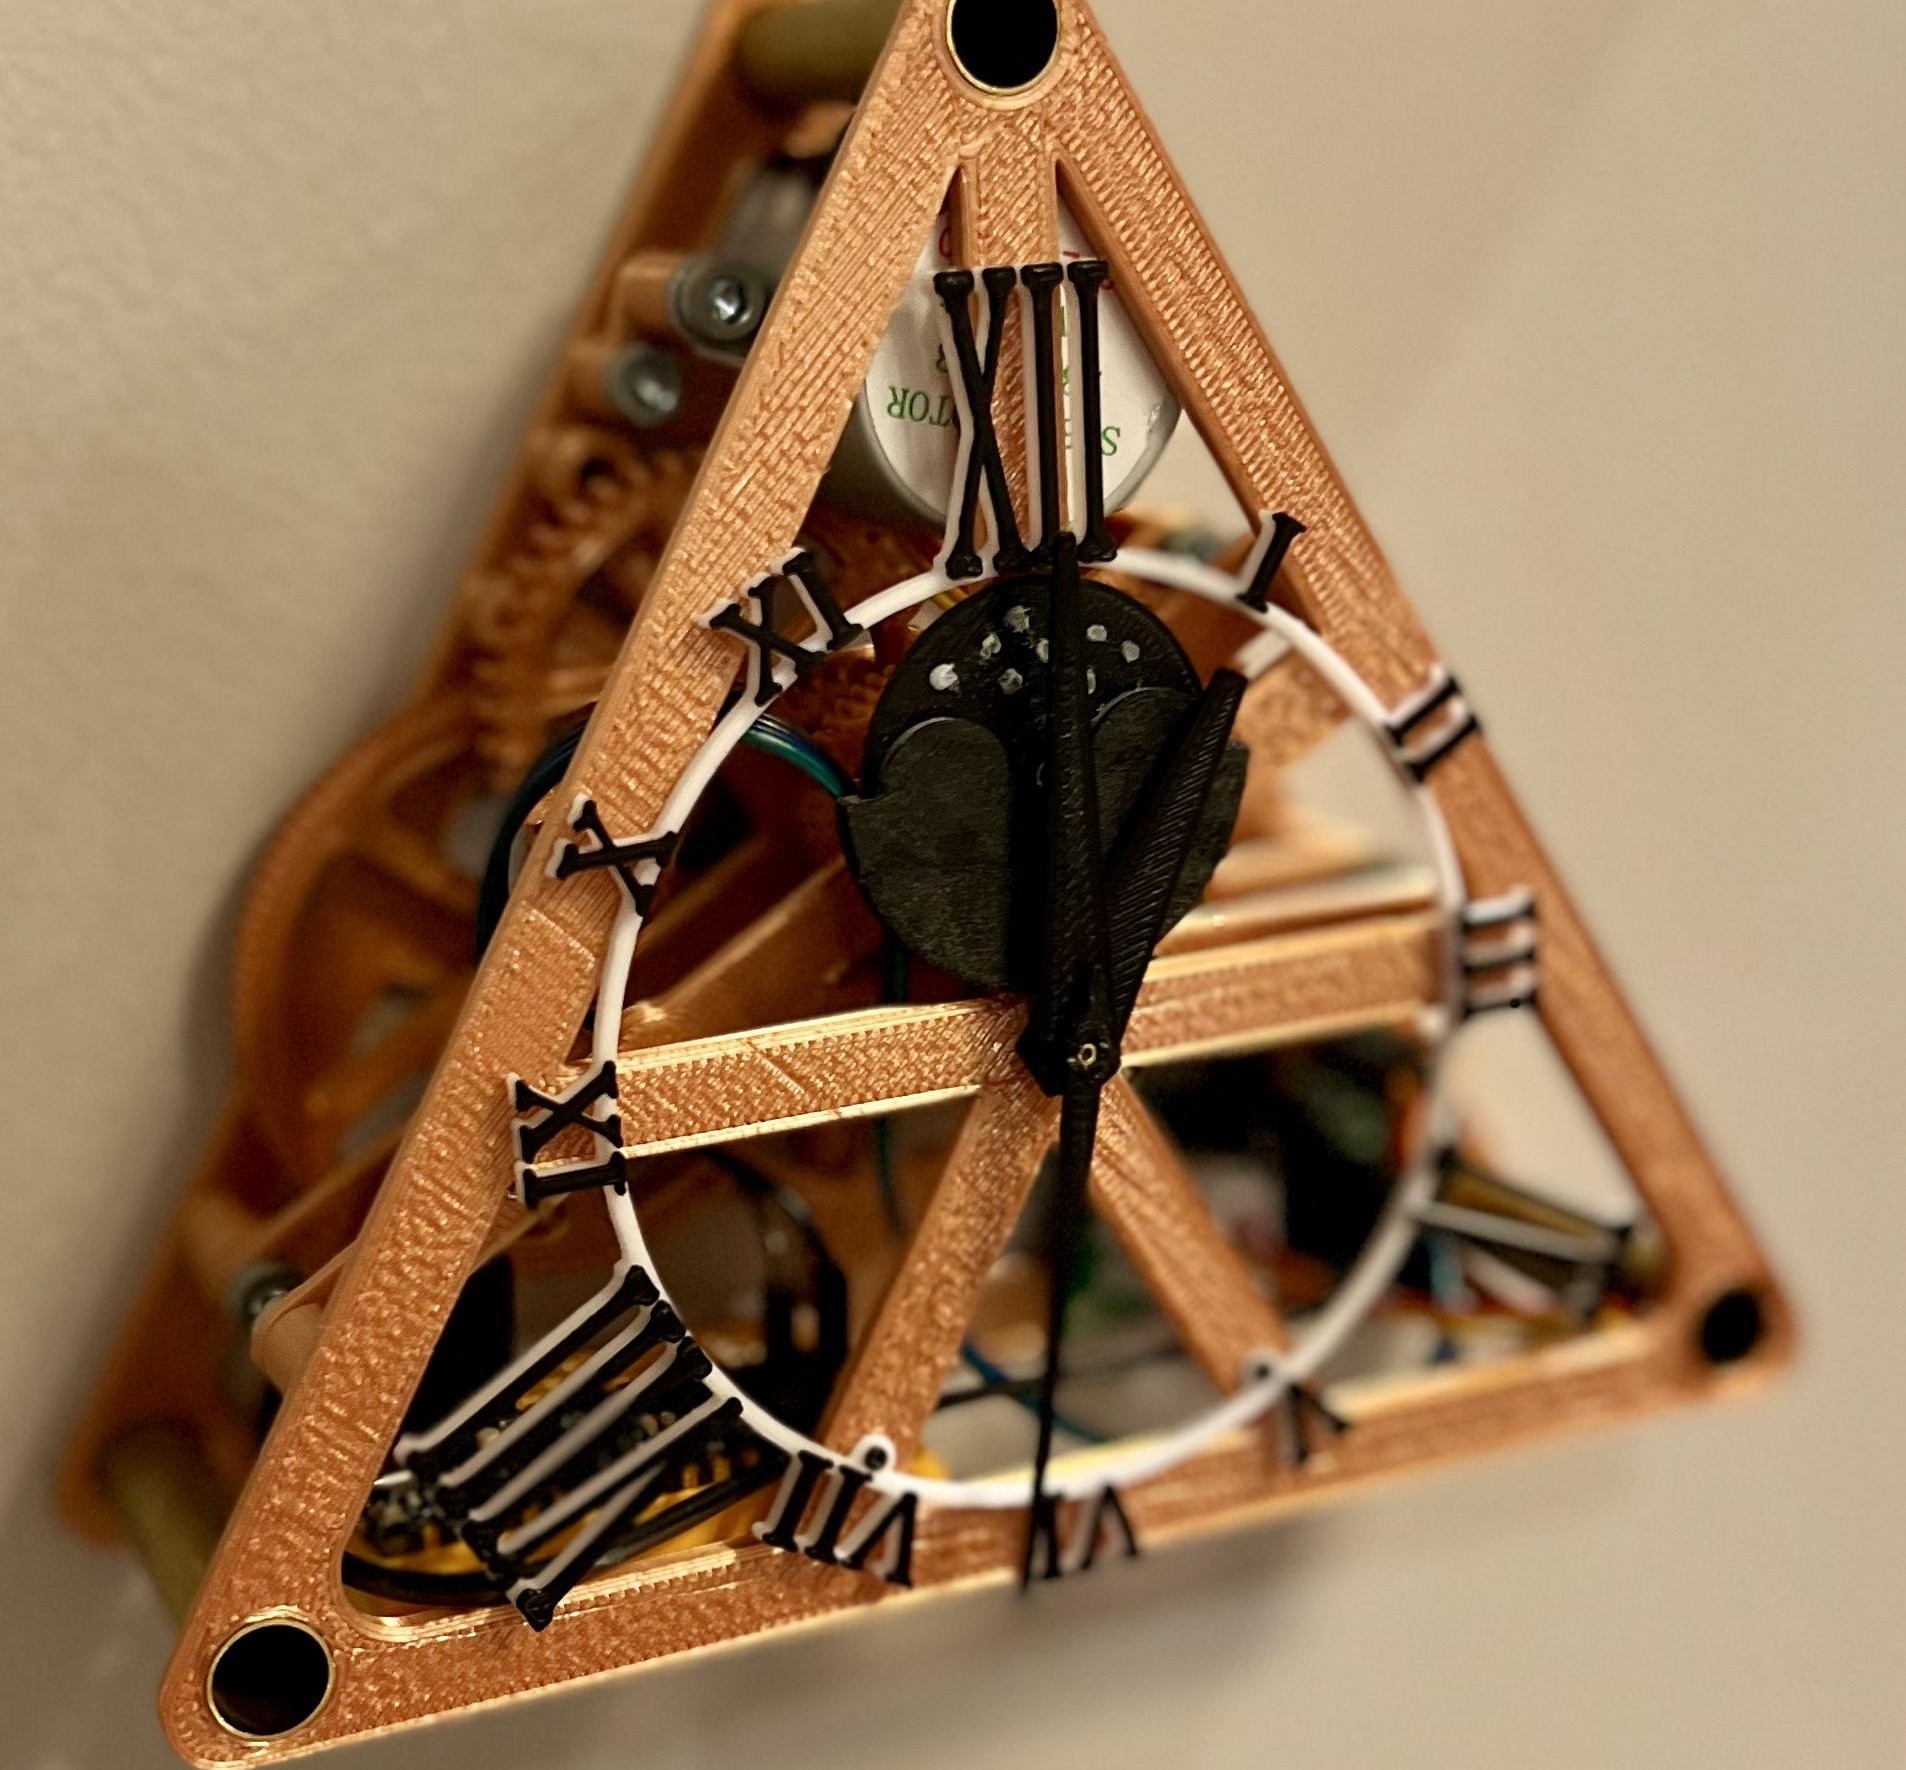 This 3D-printed, three-sided clock tells time with three hands